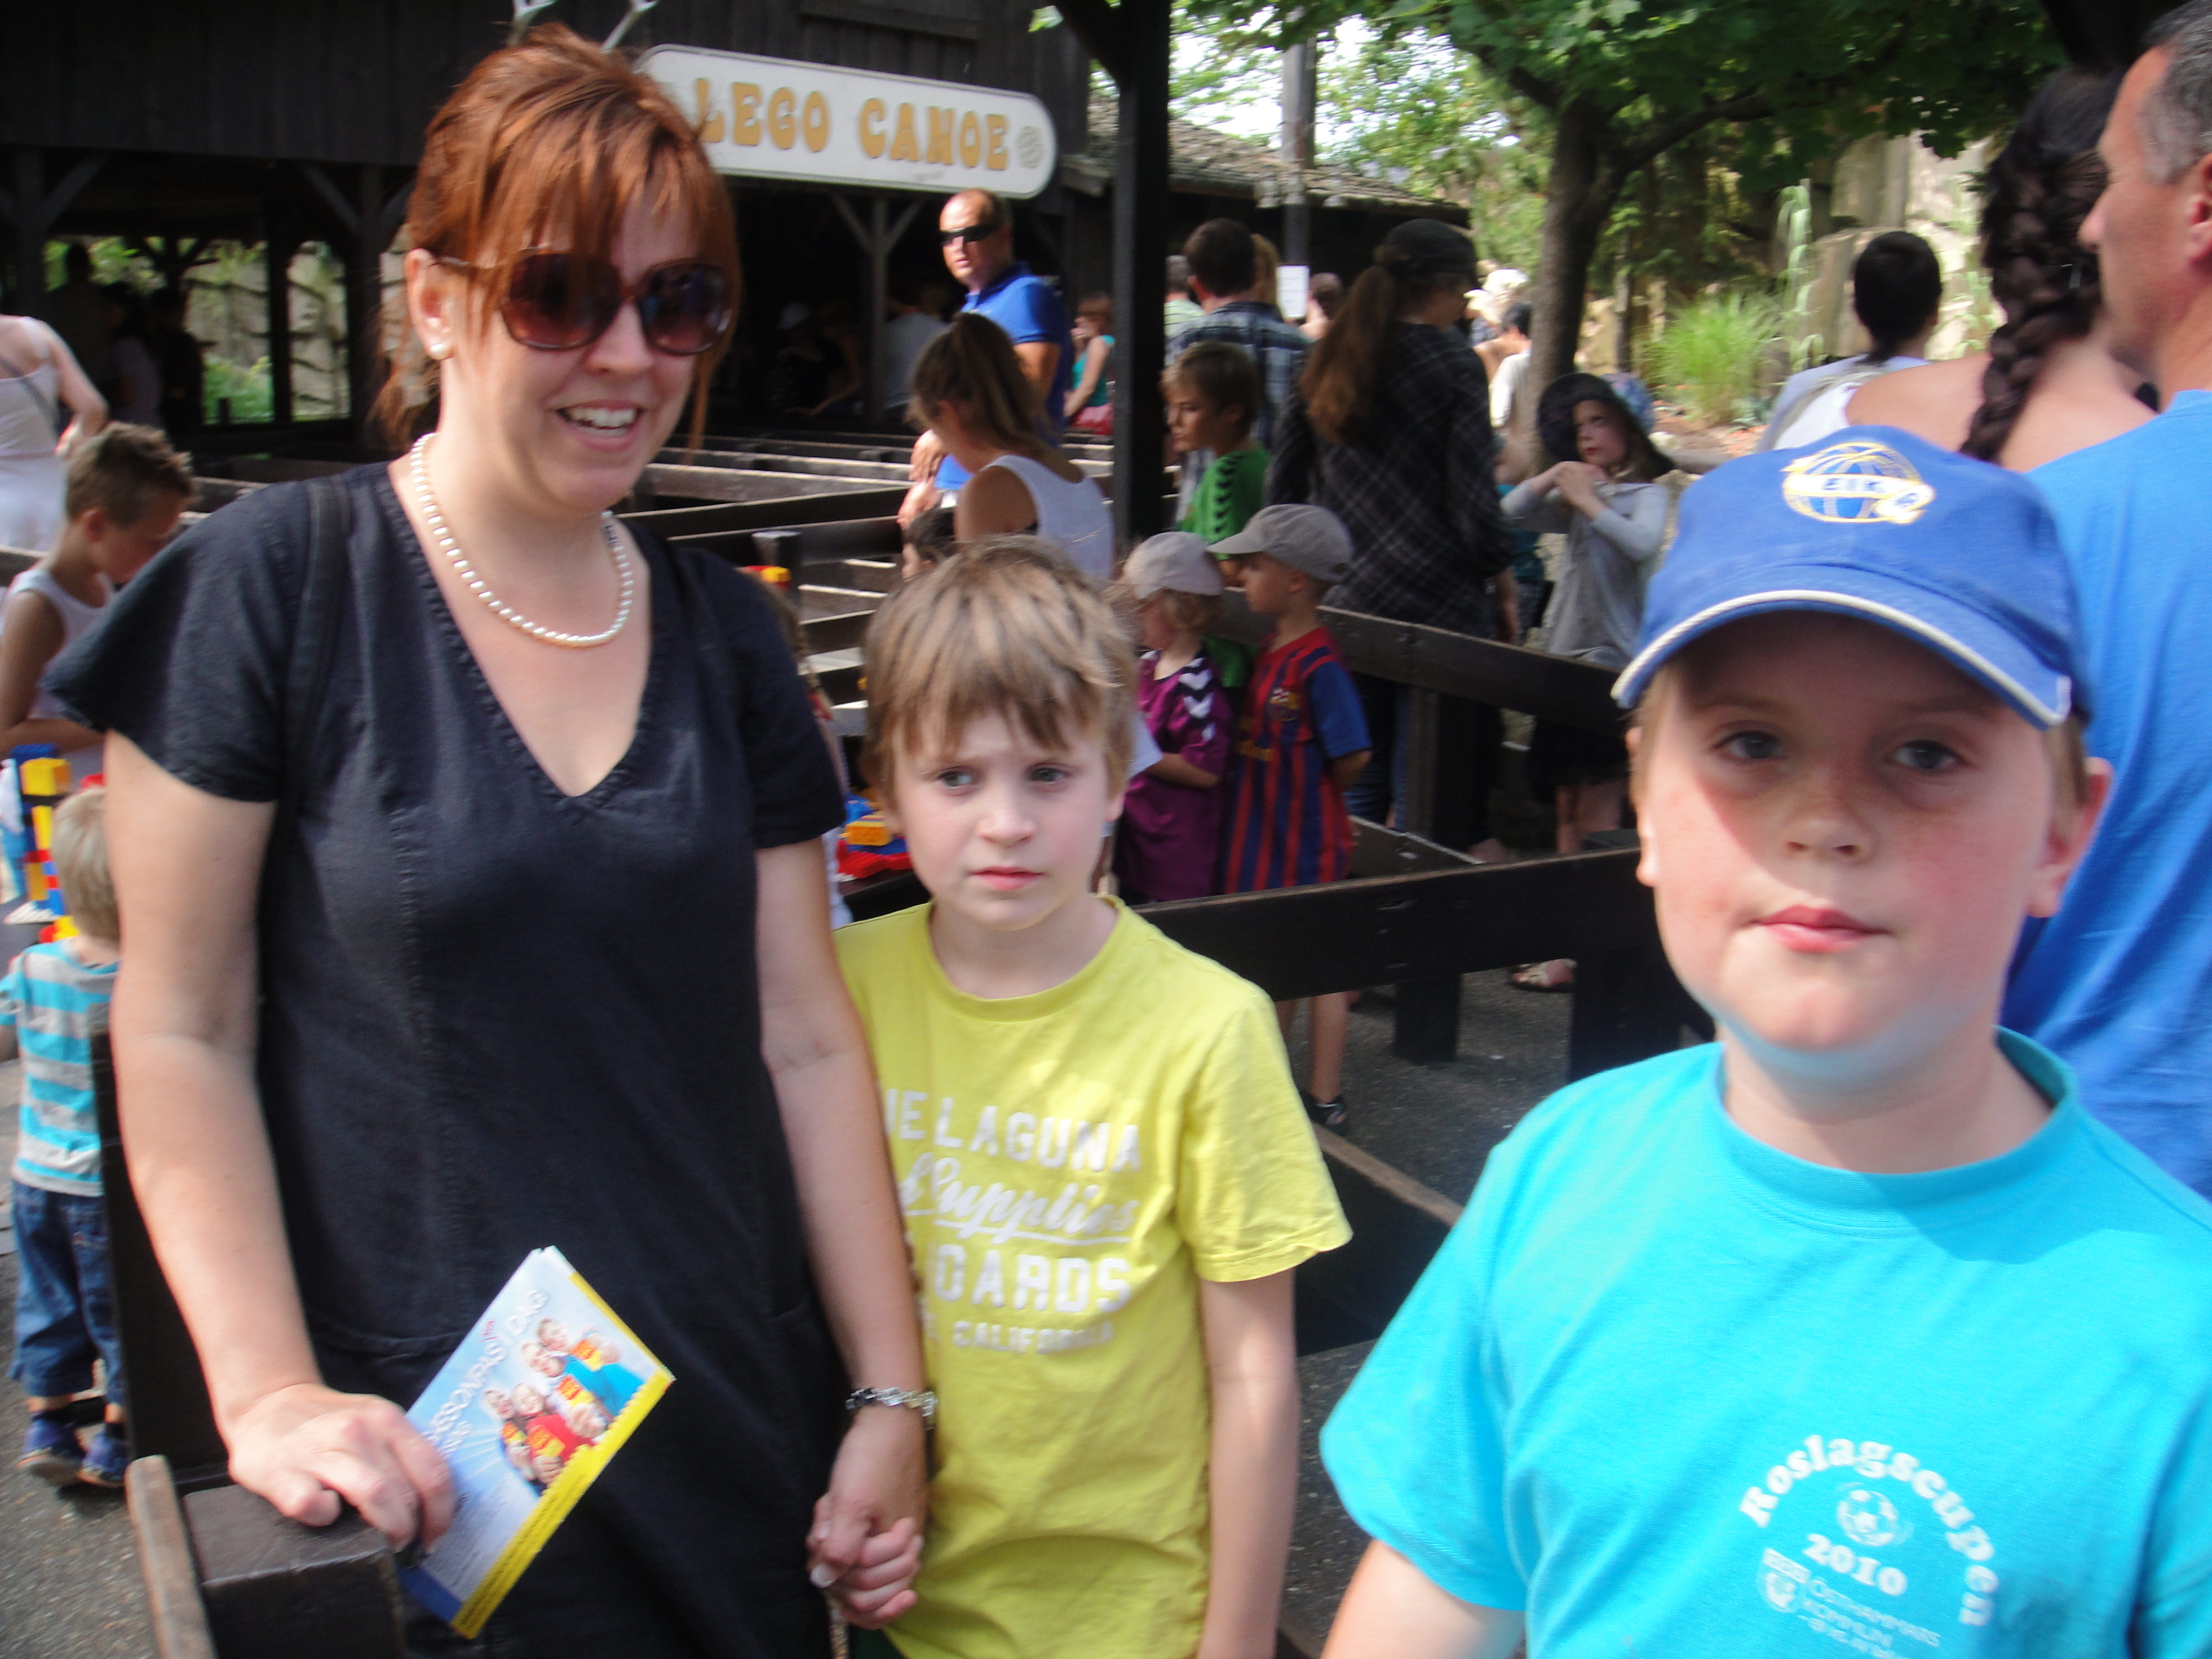 Suurkuusk and her sons at Legoland